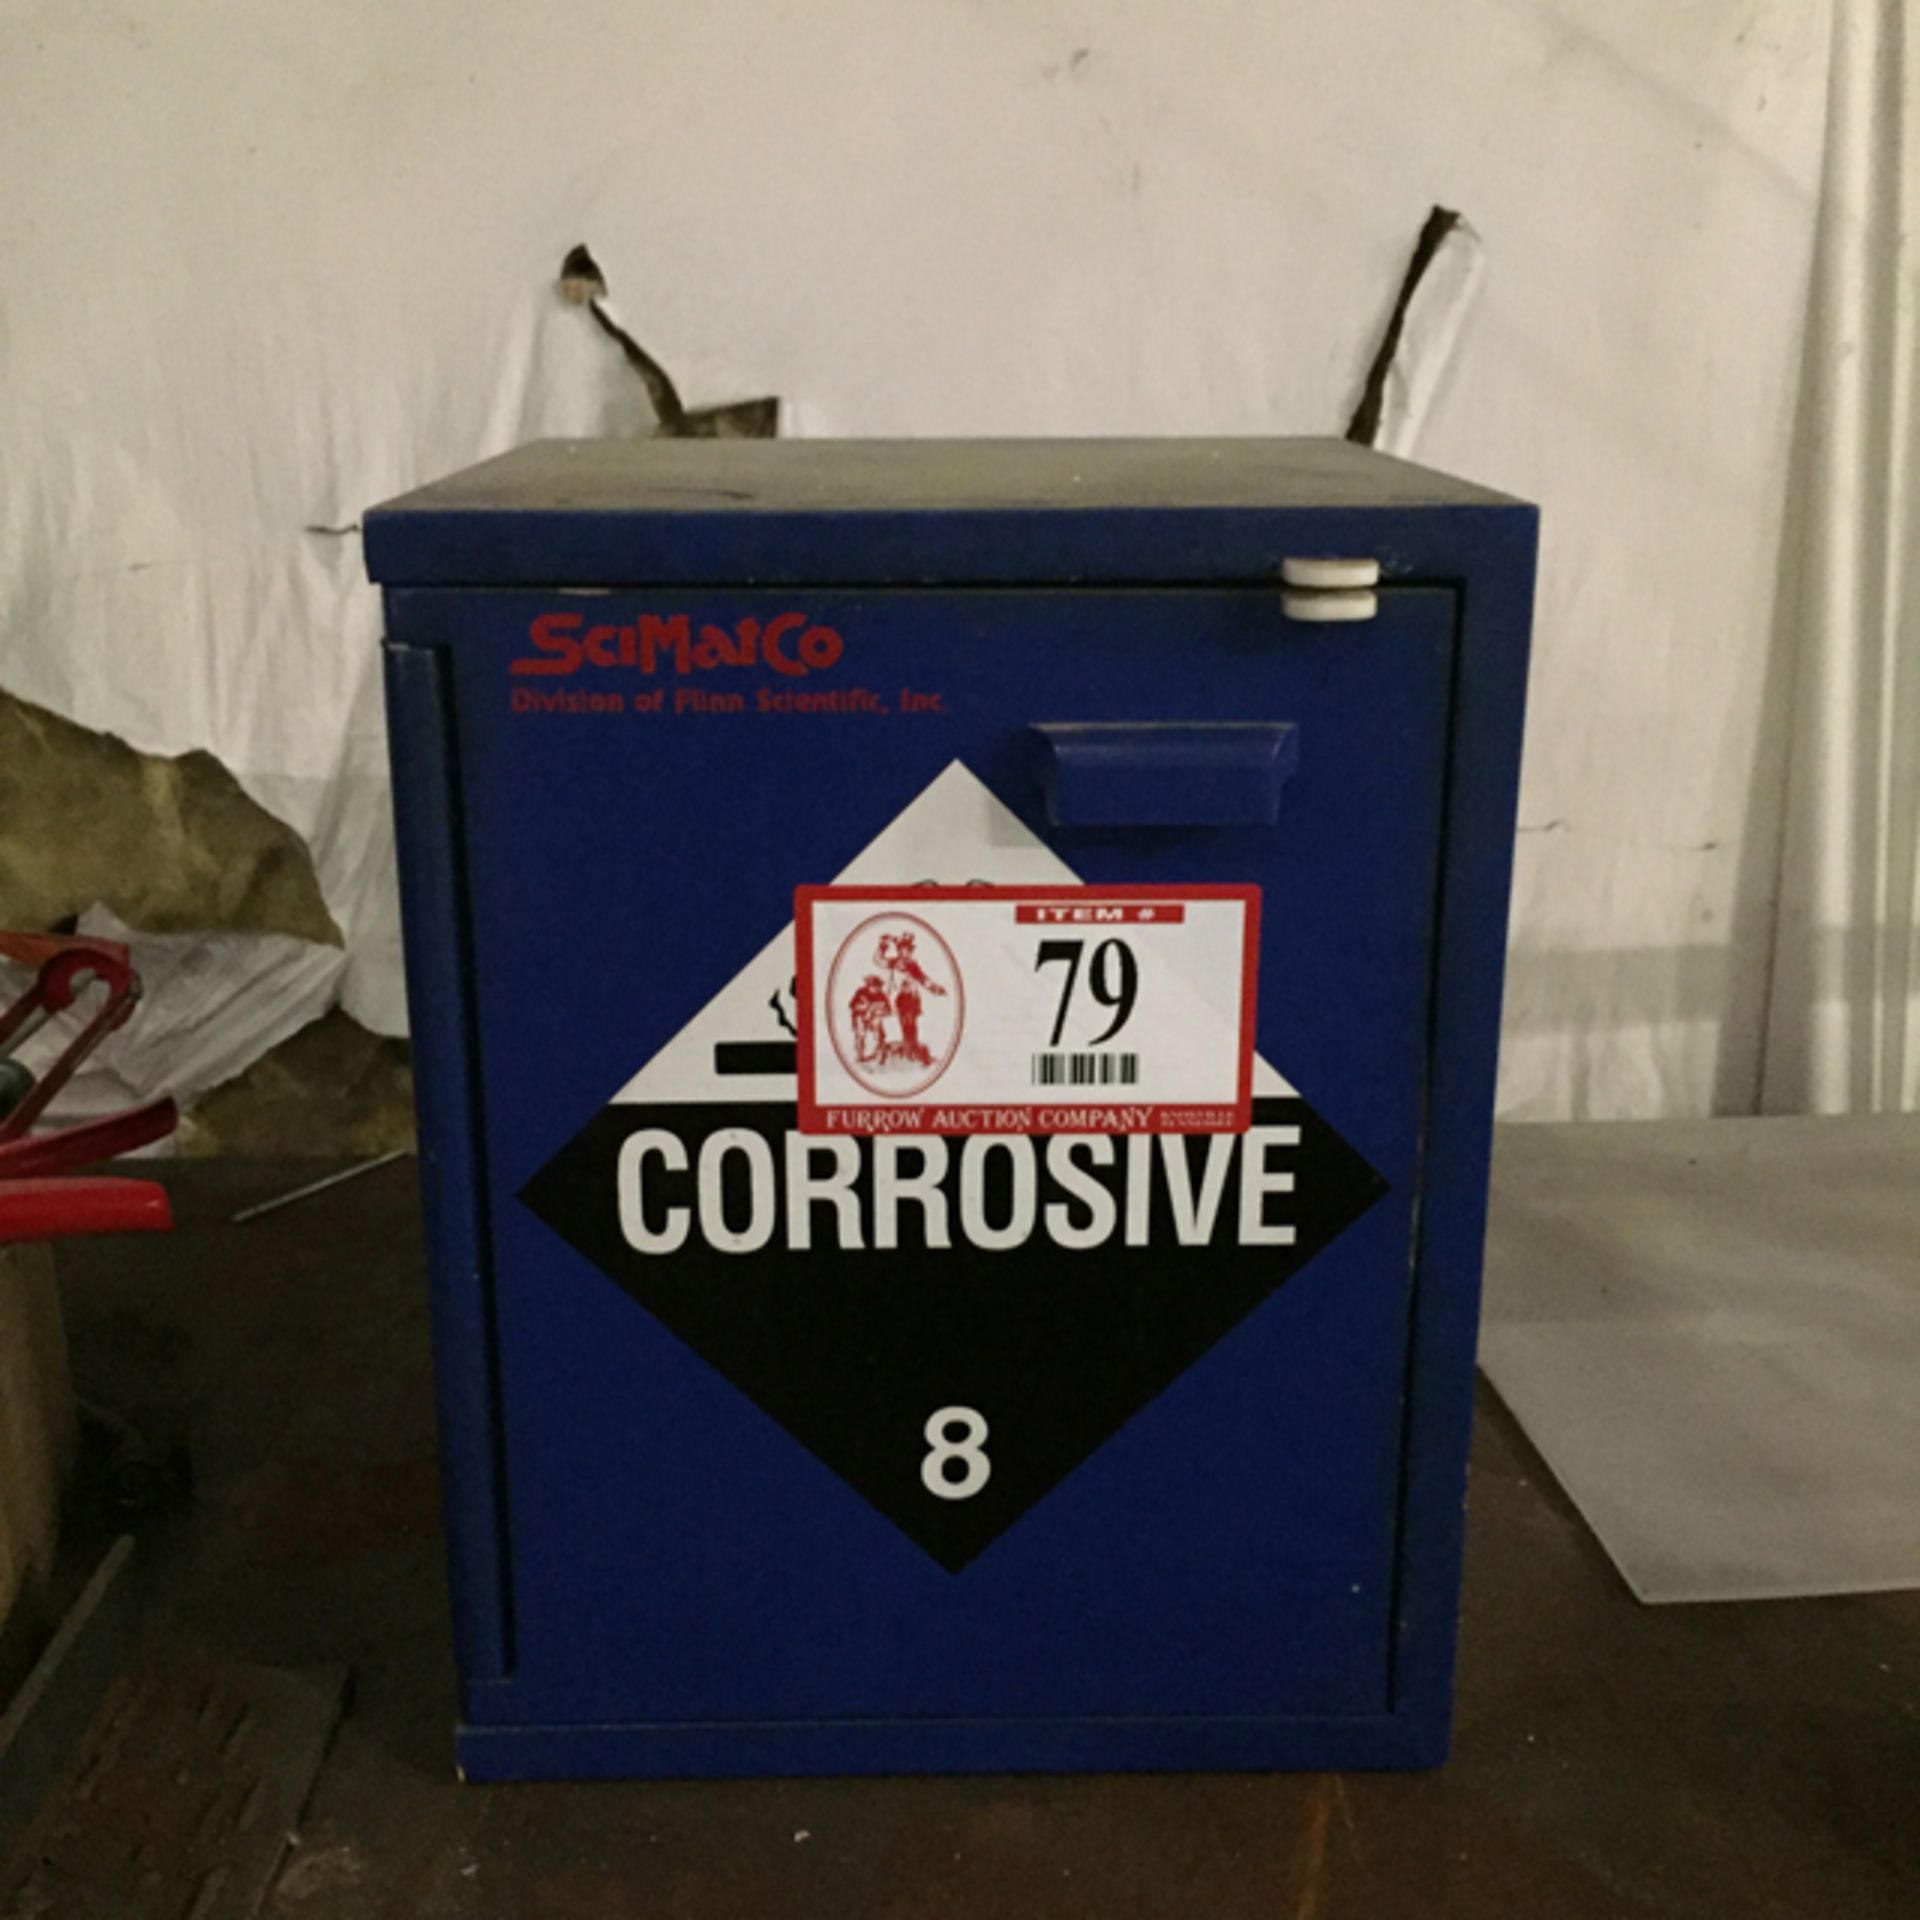 24" X 16" X 16" Corrosives Cabinet, W/Contents, Misc Chemicals